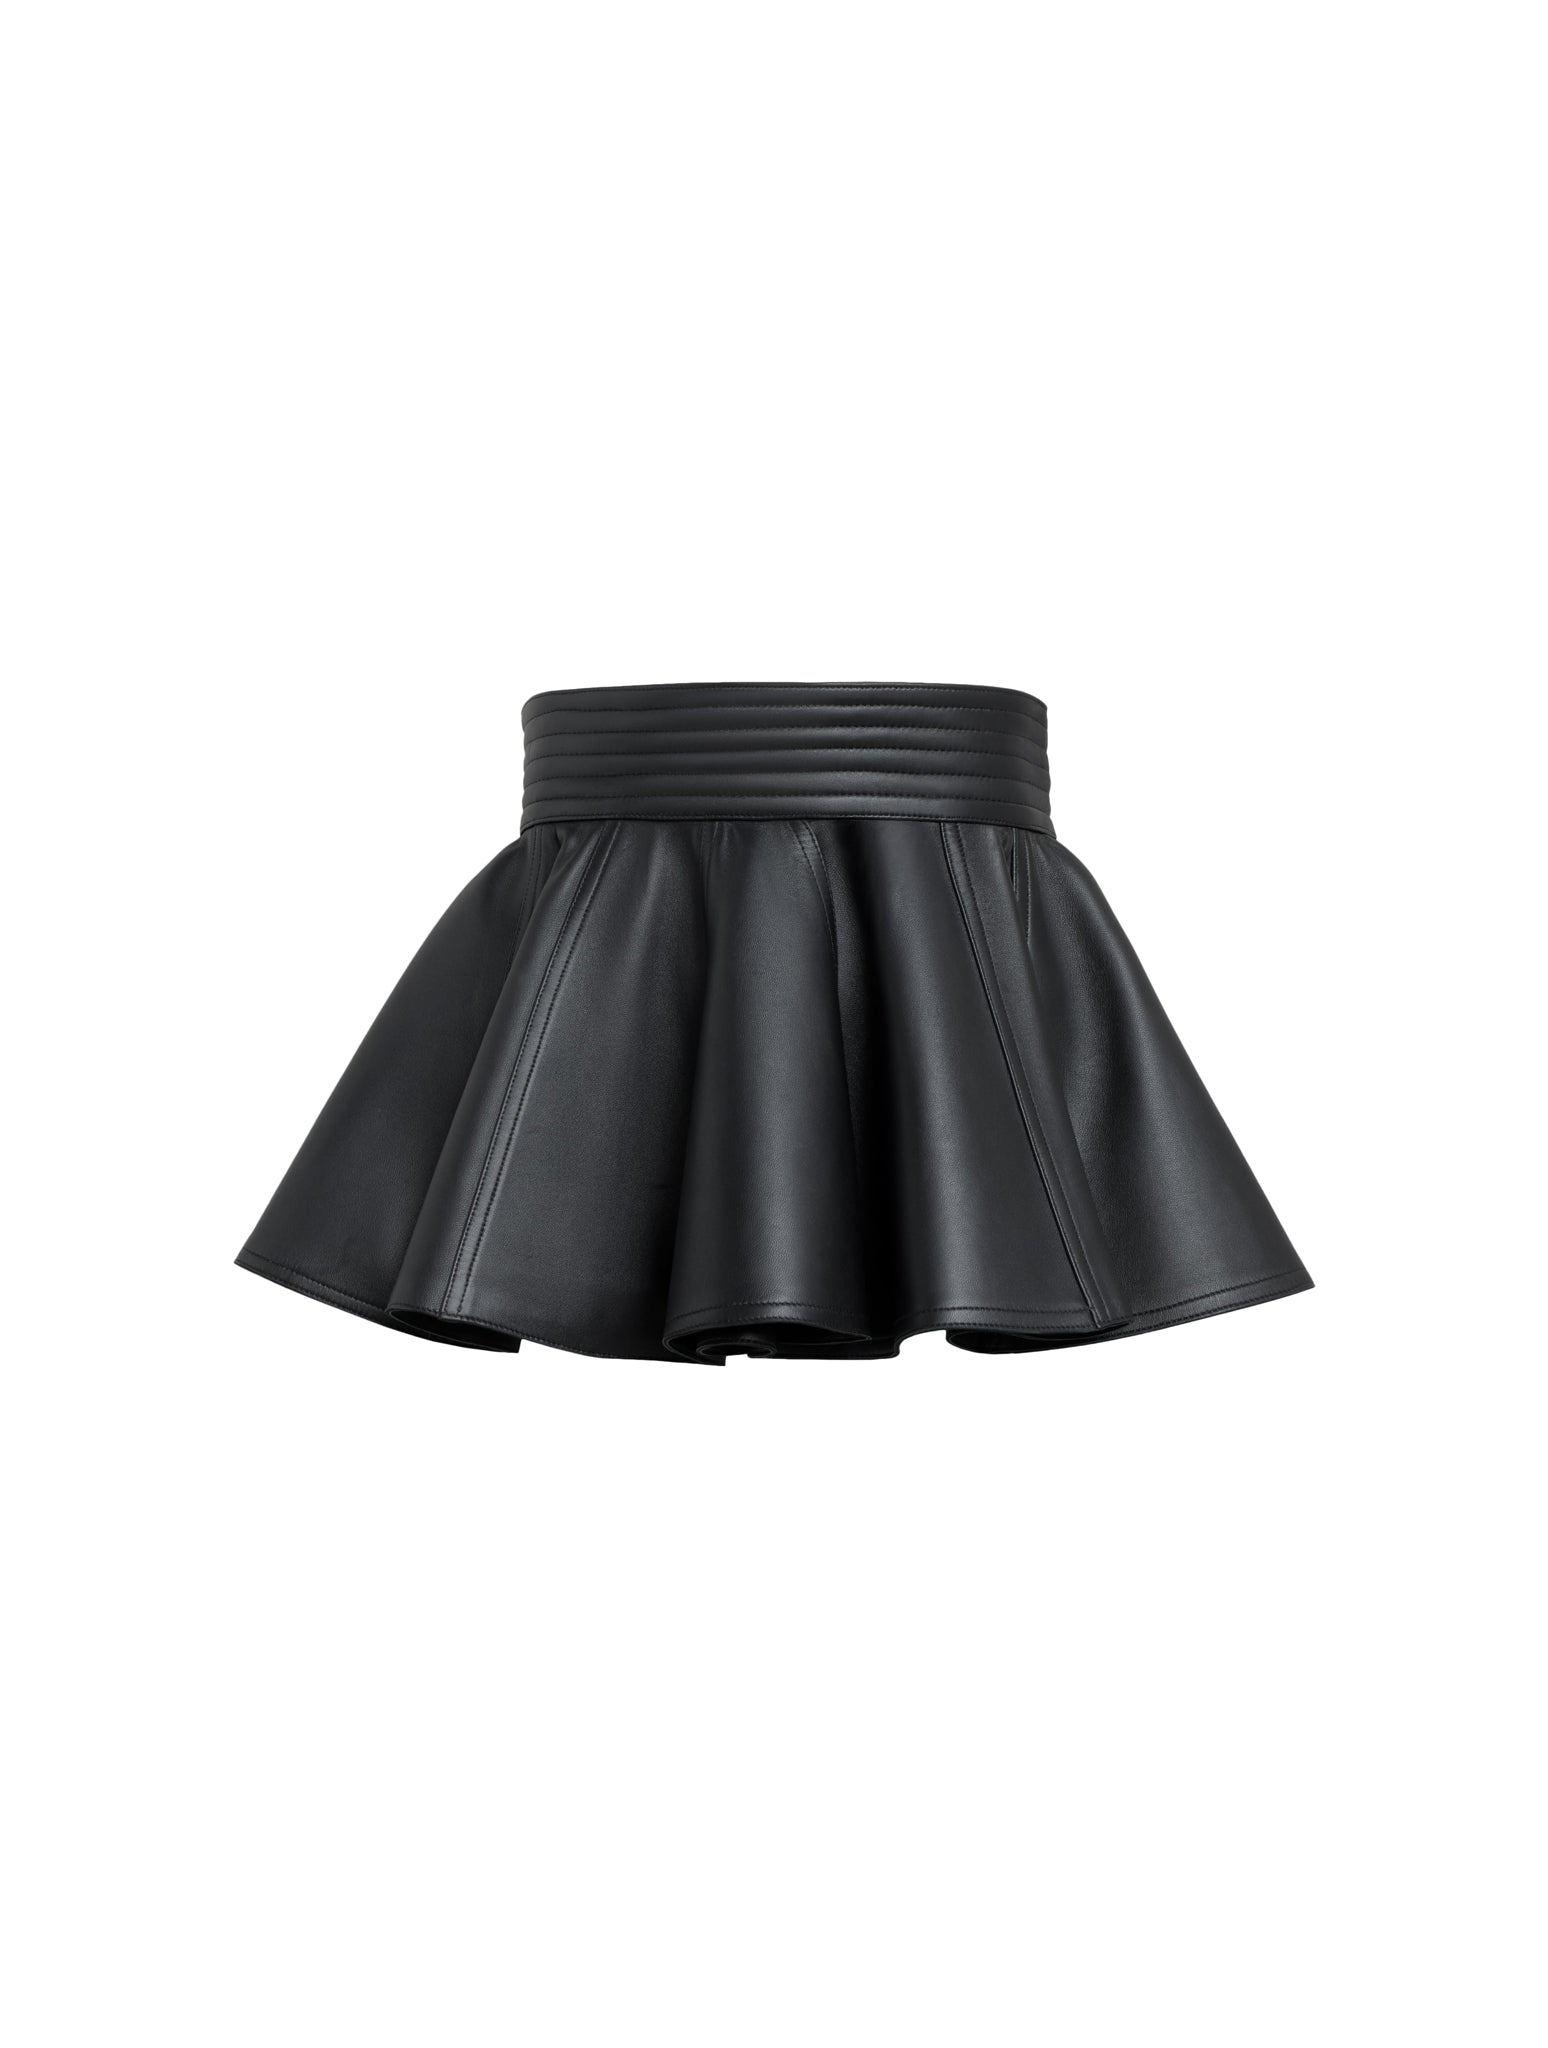 LEATHER SKIRT WITH BELT